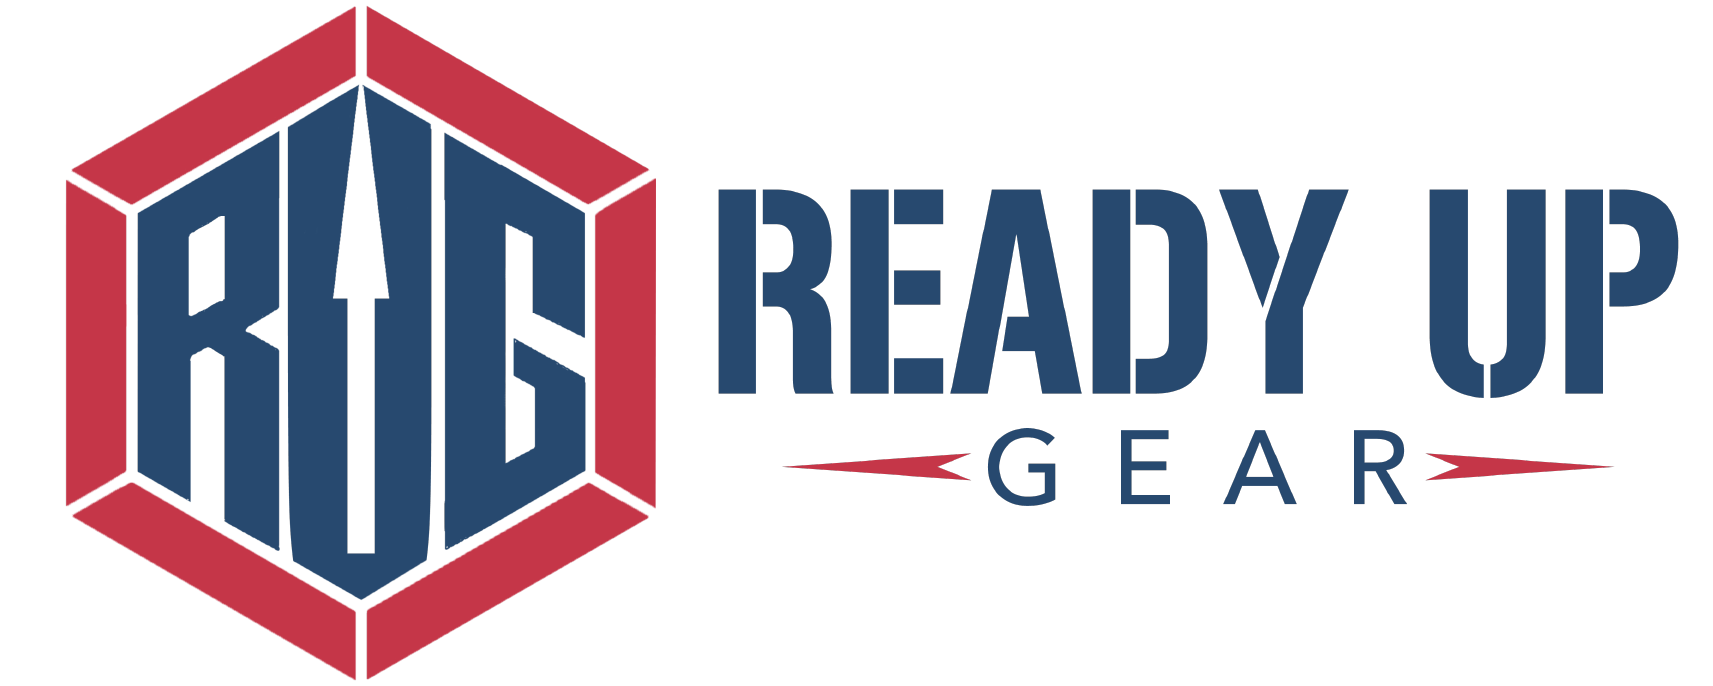 https://readyupgear.com/wp-content/uploads/2020/10/cropped-Ready-Up-Gear-Horizontal-Logo.png